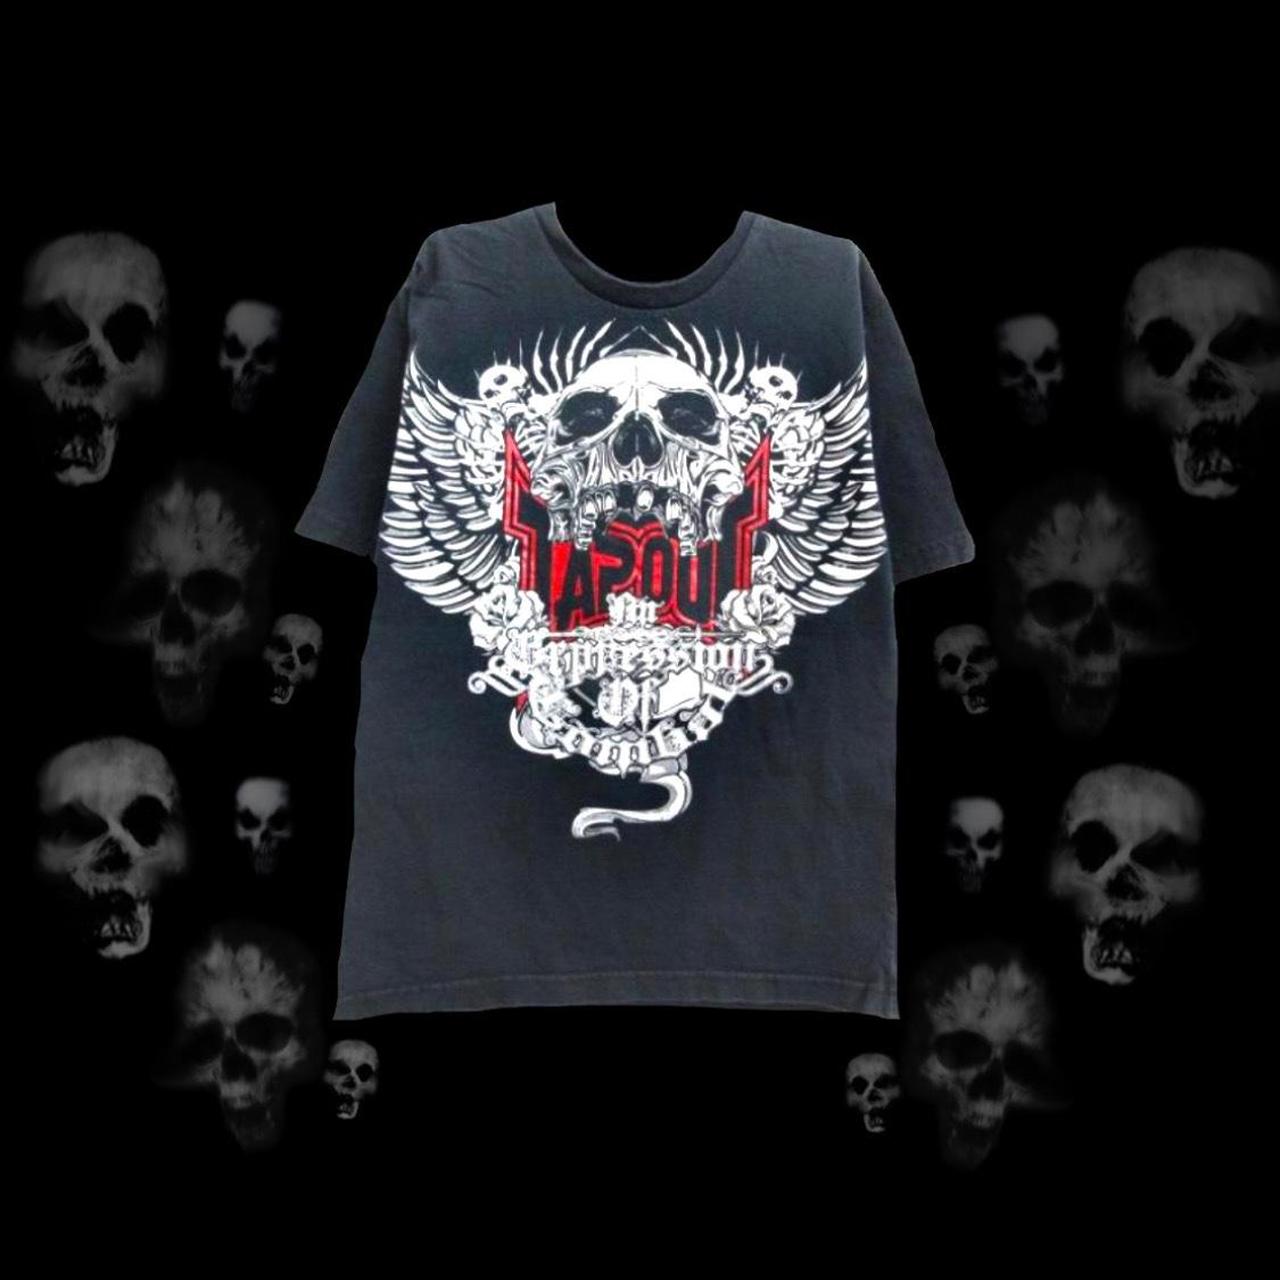 tapout mallgoth skull t shirt size s #tapout... - Depop